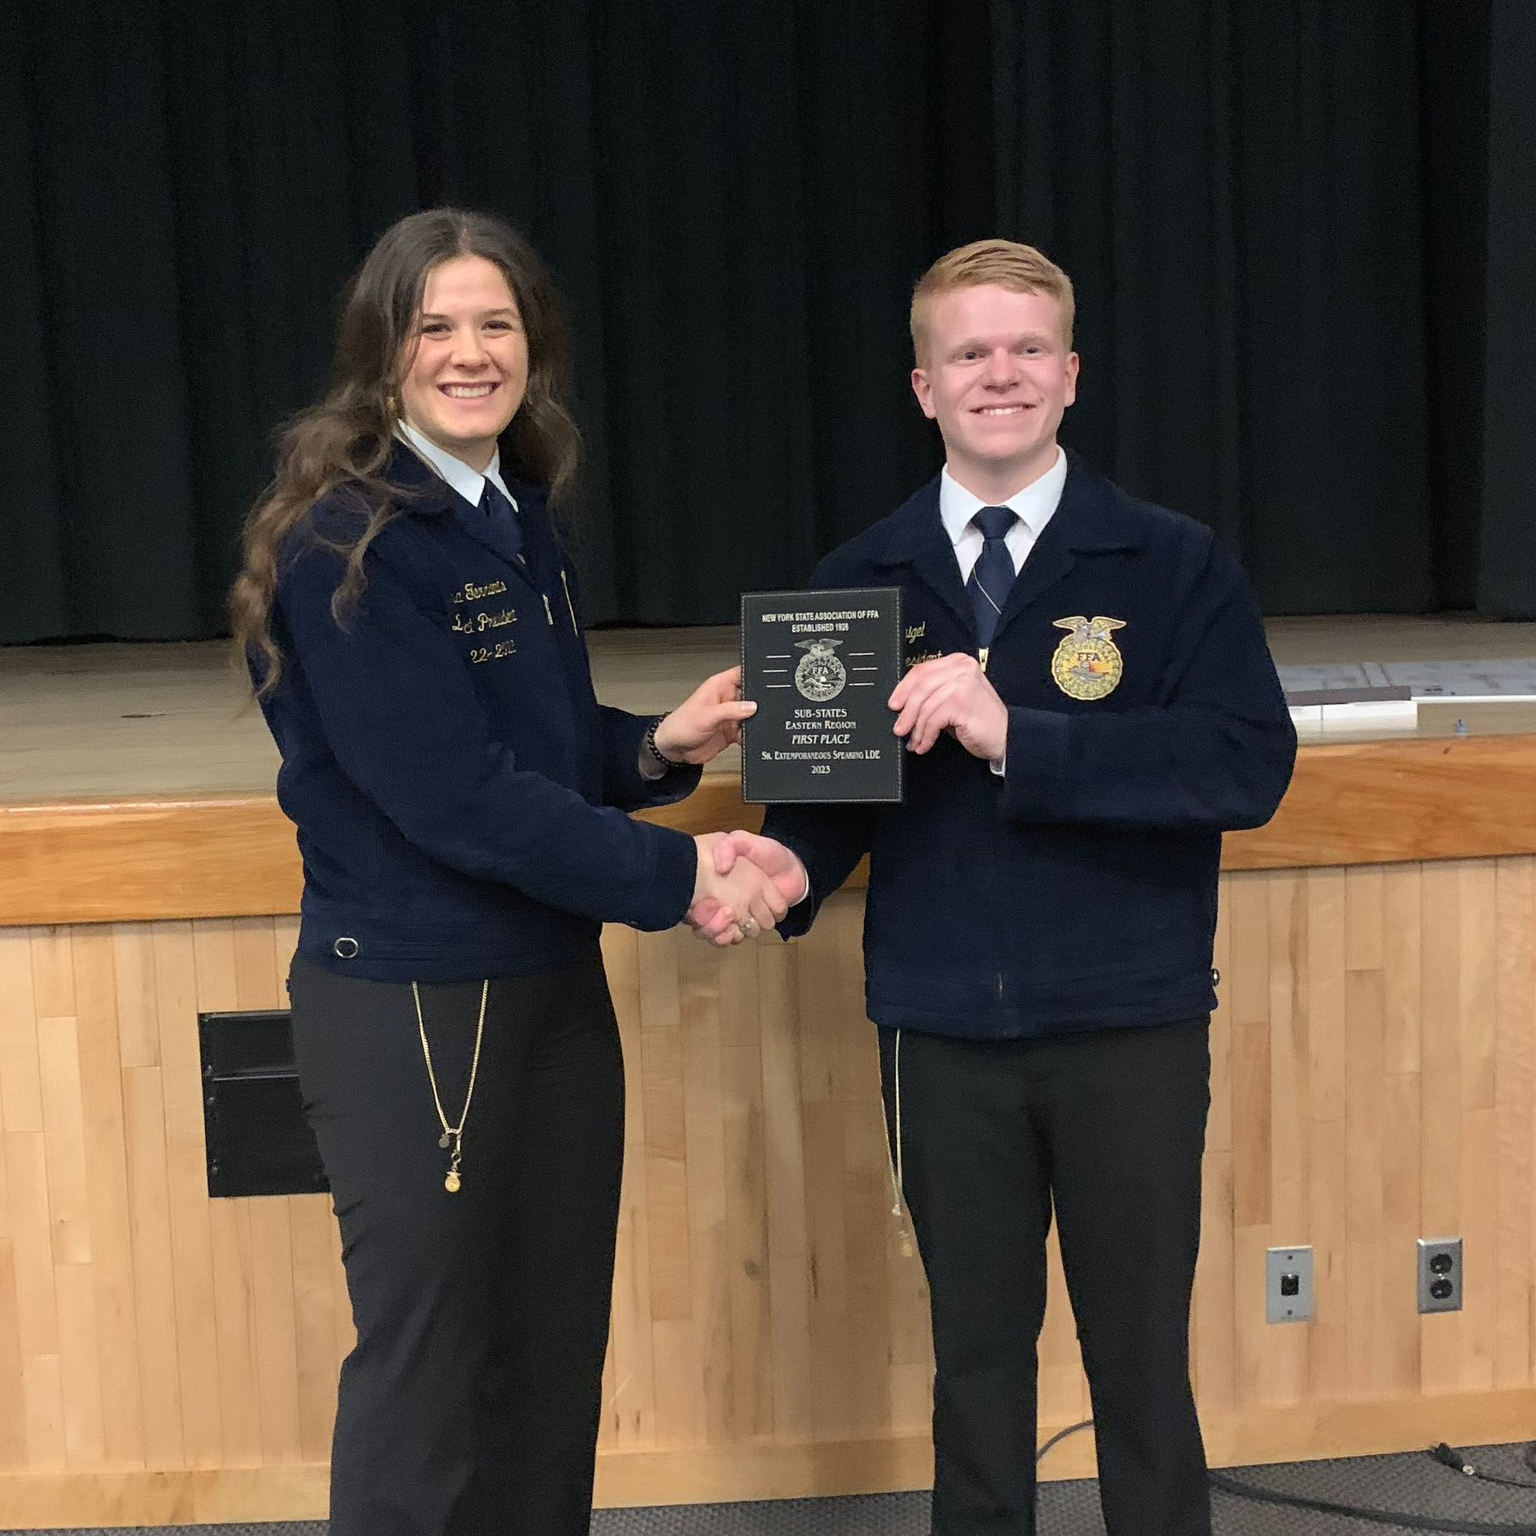 Congratulations to senior Ellie Tarrants for winning the FFA Extemporaneous Speaking regional competition!